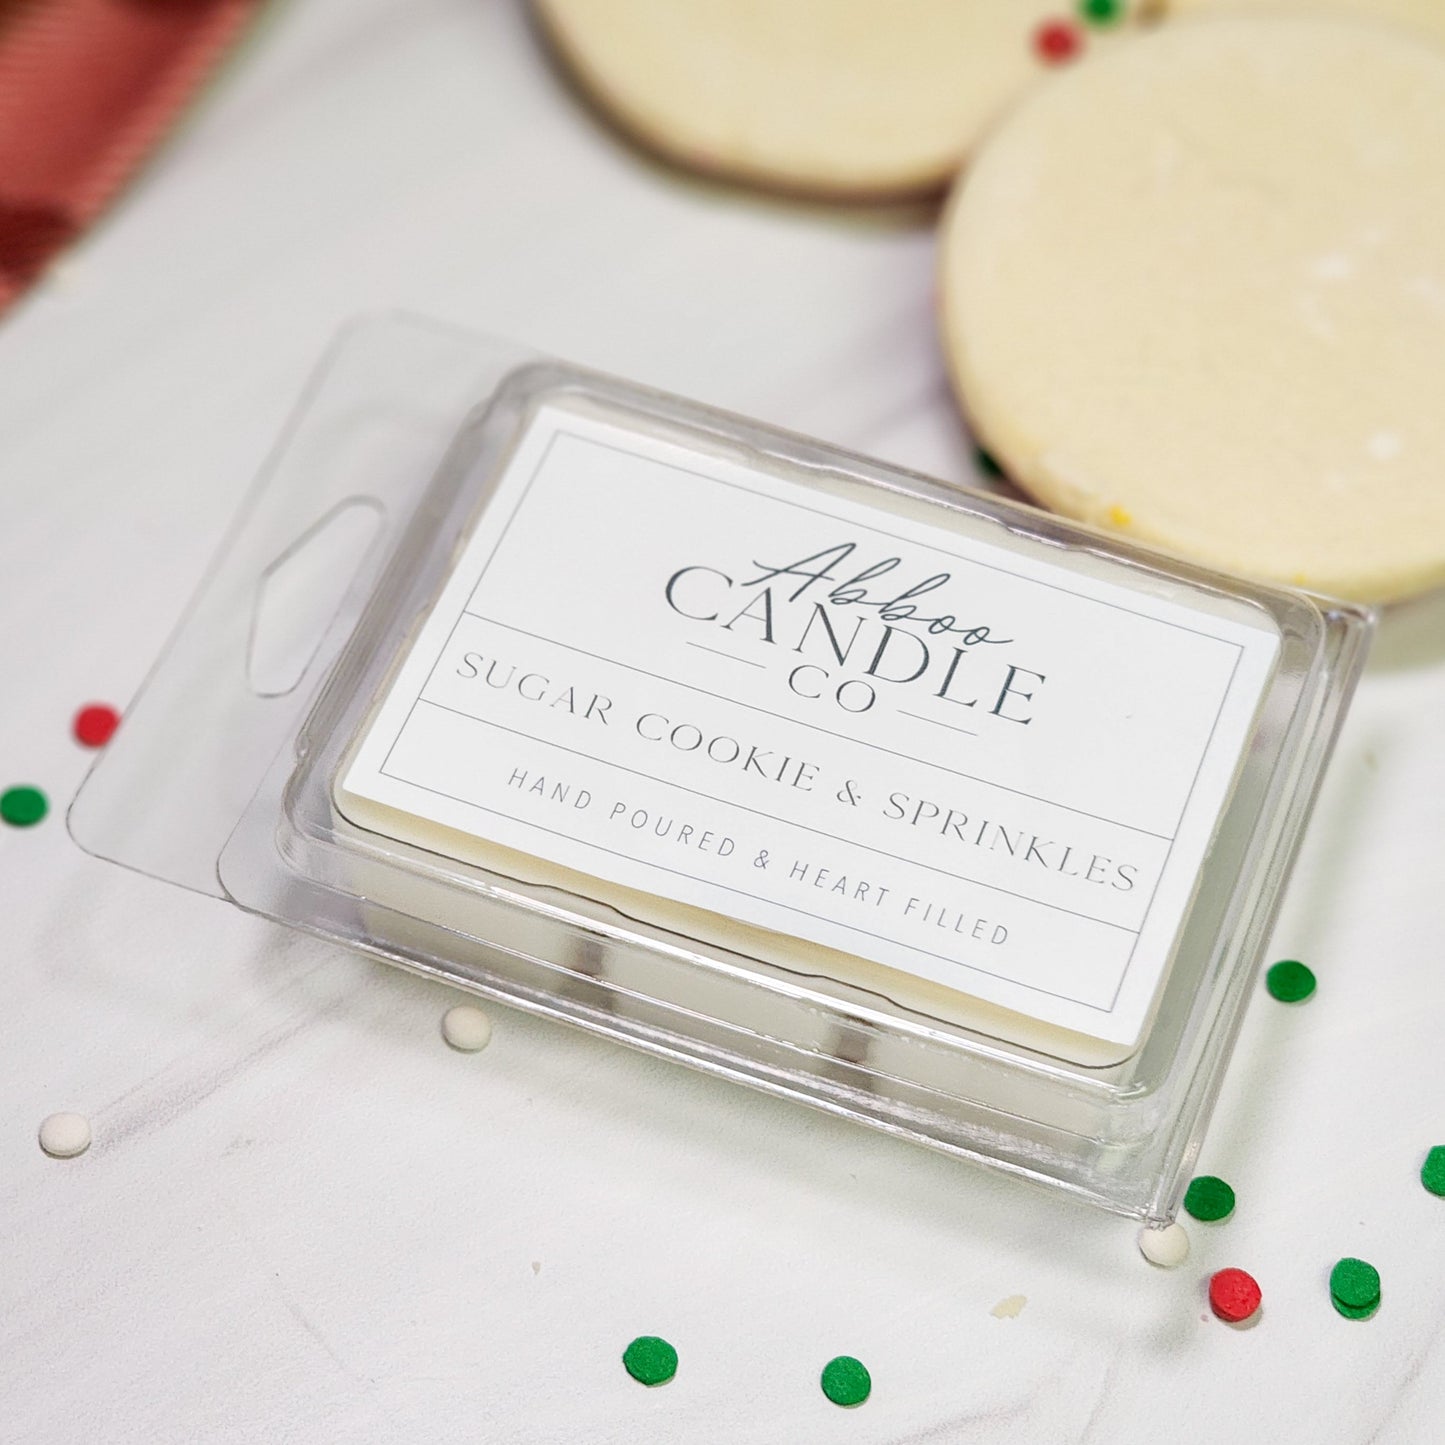 Sugar Cookie and Sprinkles Soy Wax Melts - Abboo Candle Co® Wholesale